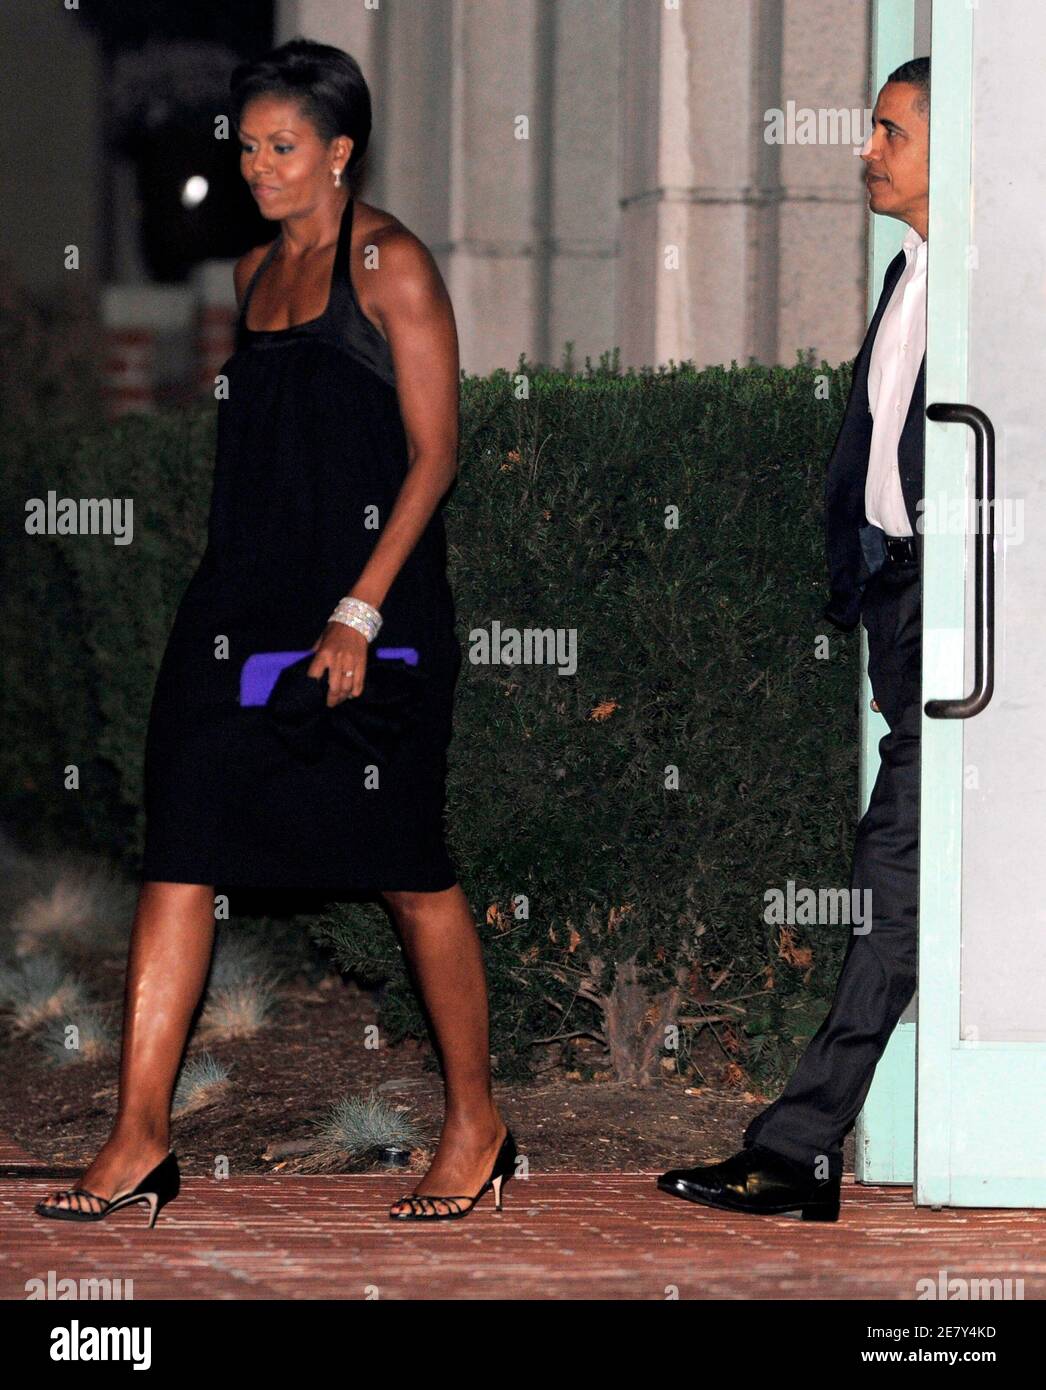 U.S. President Barack Obama (R) and first lady Michelle Obama depart the Blueduck Tavern in the Georgetown section of Washington after a dinner celebrating their 17th wedding anniversary October 3, 2009.  REUTERS/Mike Theiler (UNITED STATES POLITICS SOCIETY) Stock Photo